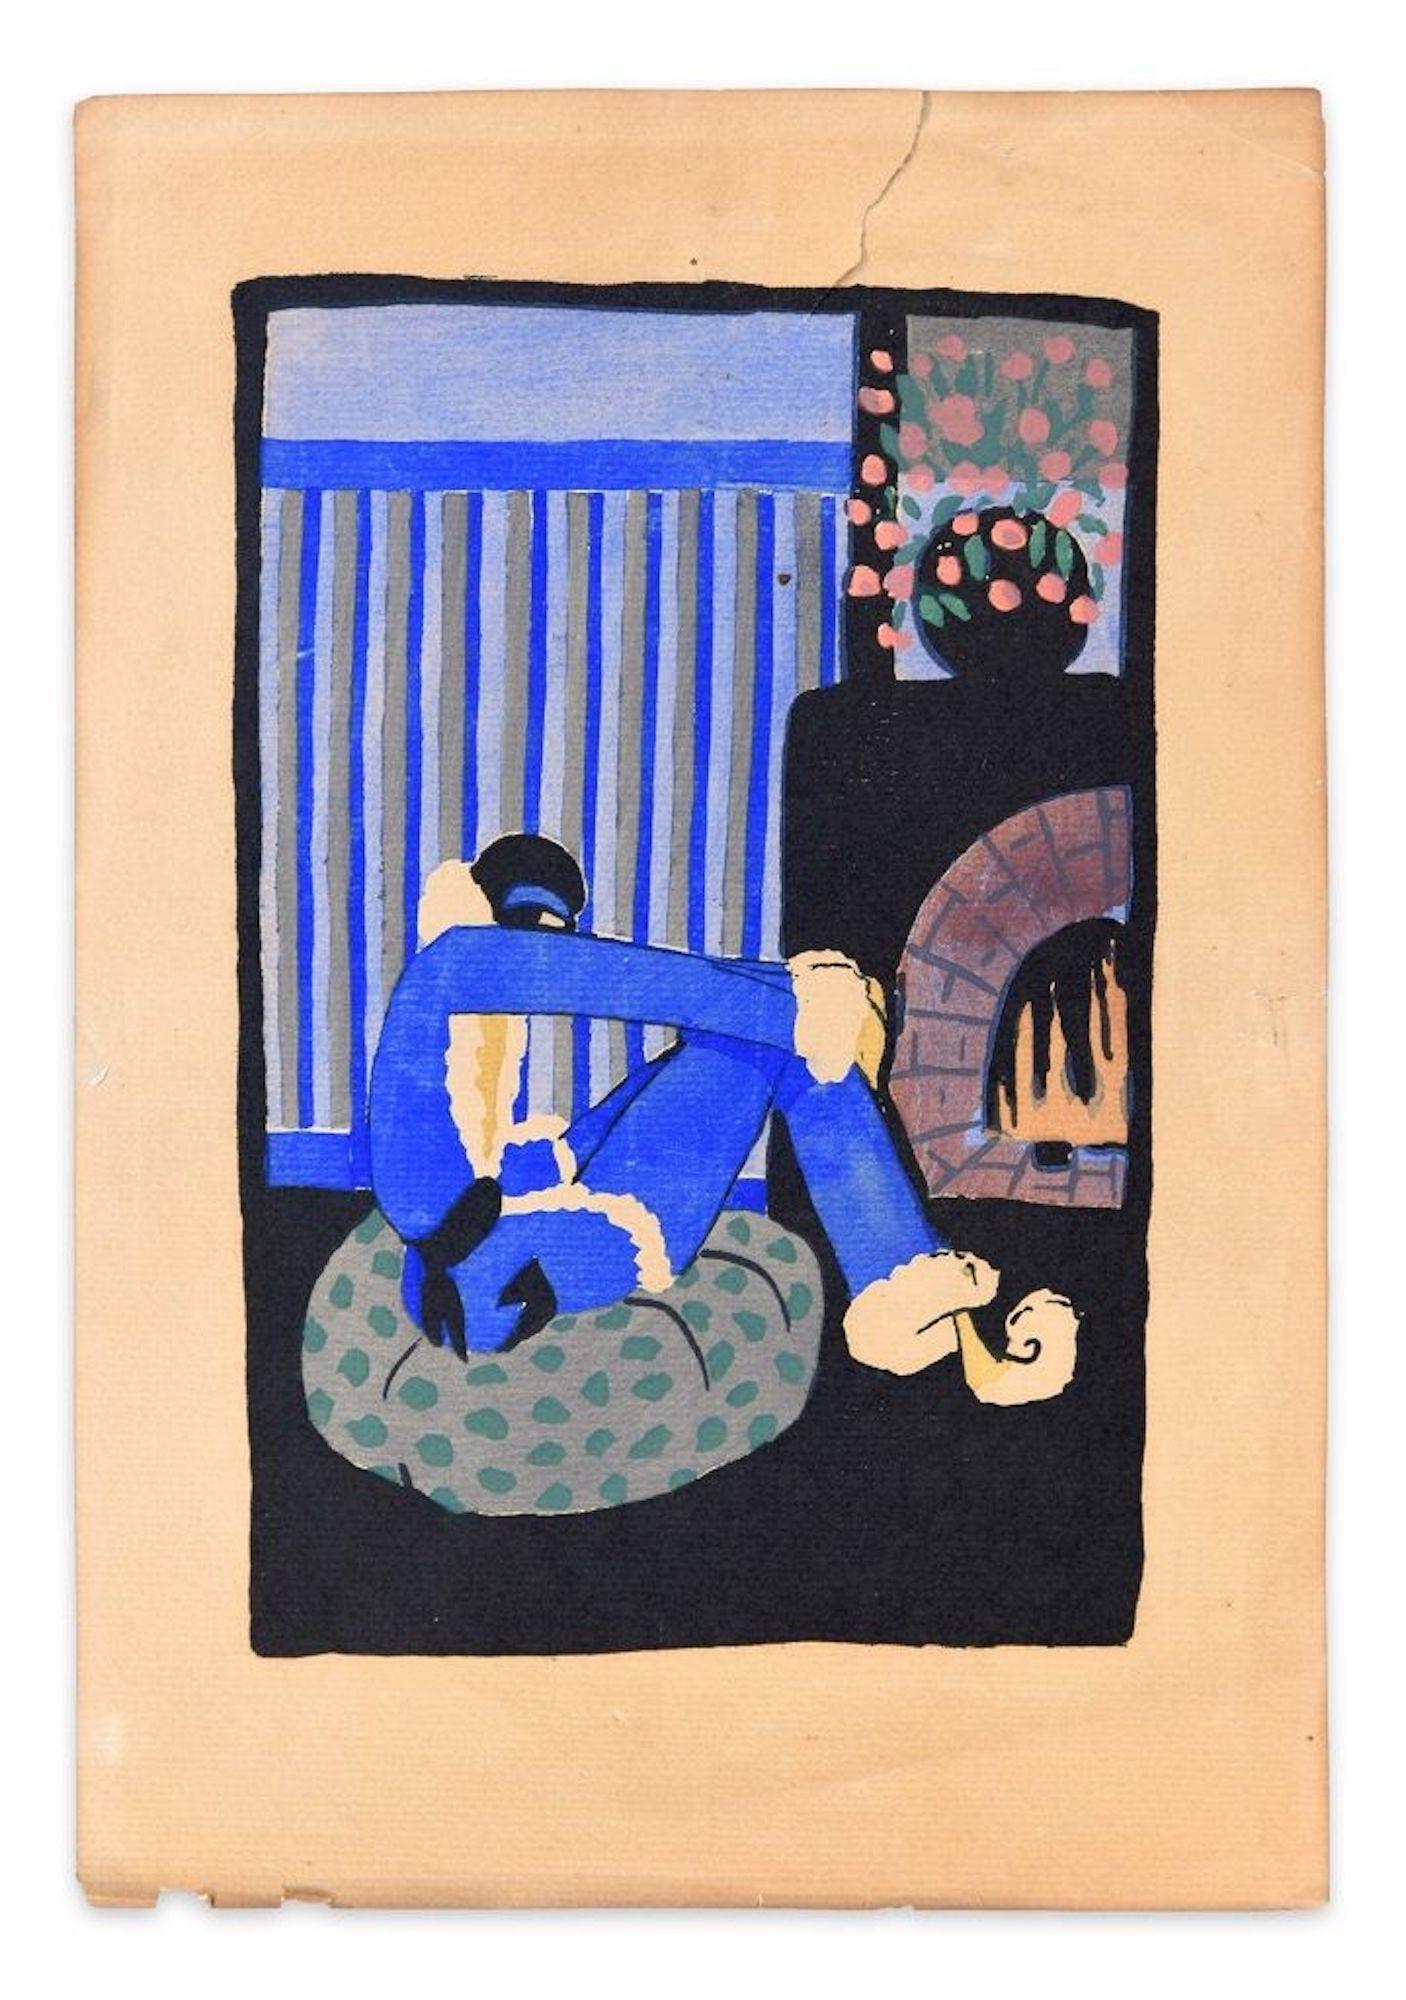 Unknown Figurative Print - Blue Christmas - Woodcut Hand Colored in Tempera on Paper - Art Deco - 1920s